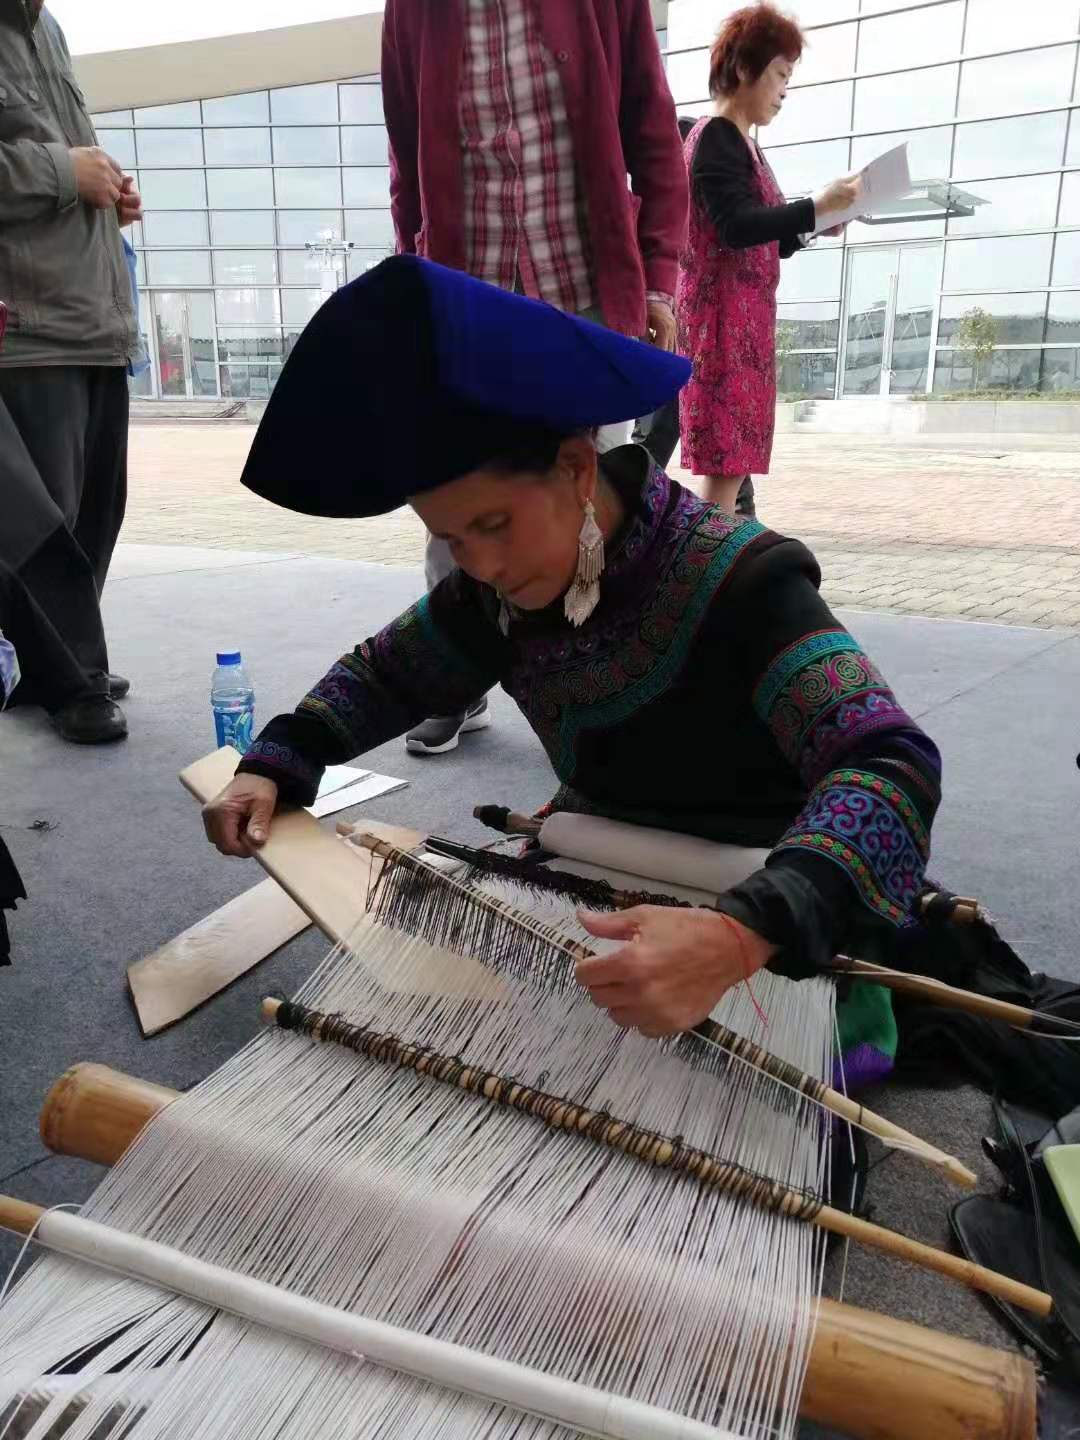 The Seventh Intangible Cultural Heritage Festival